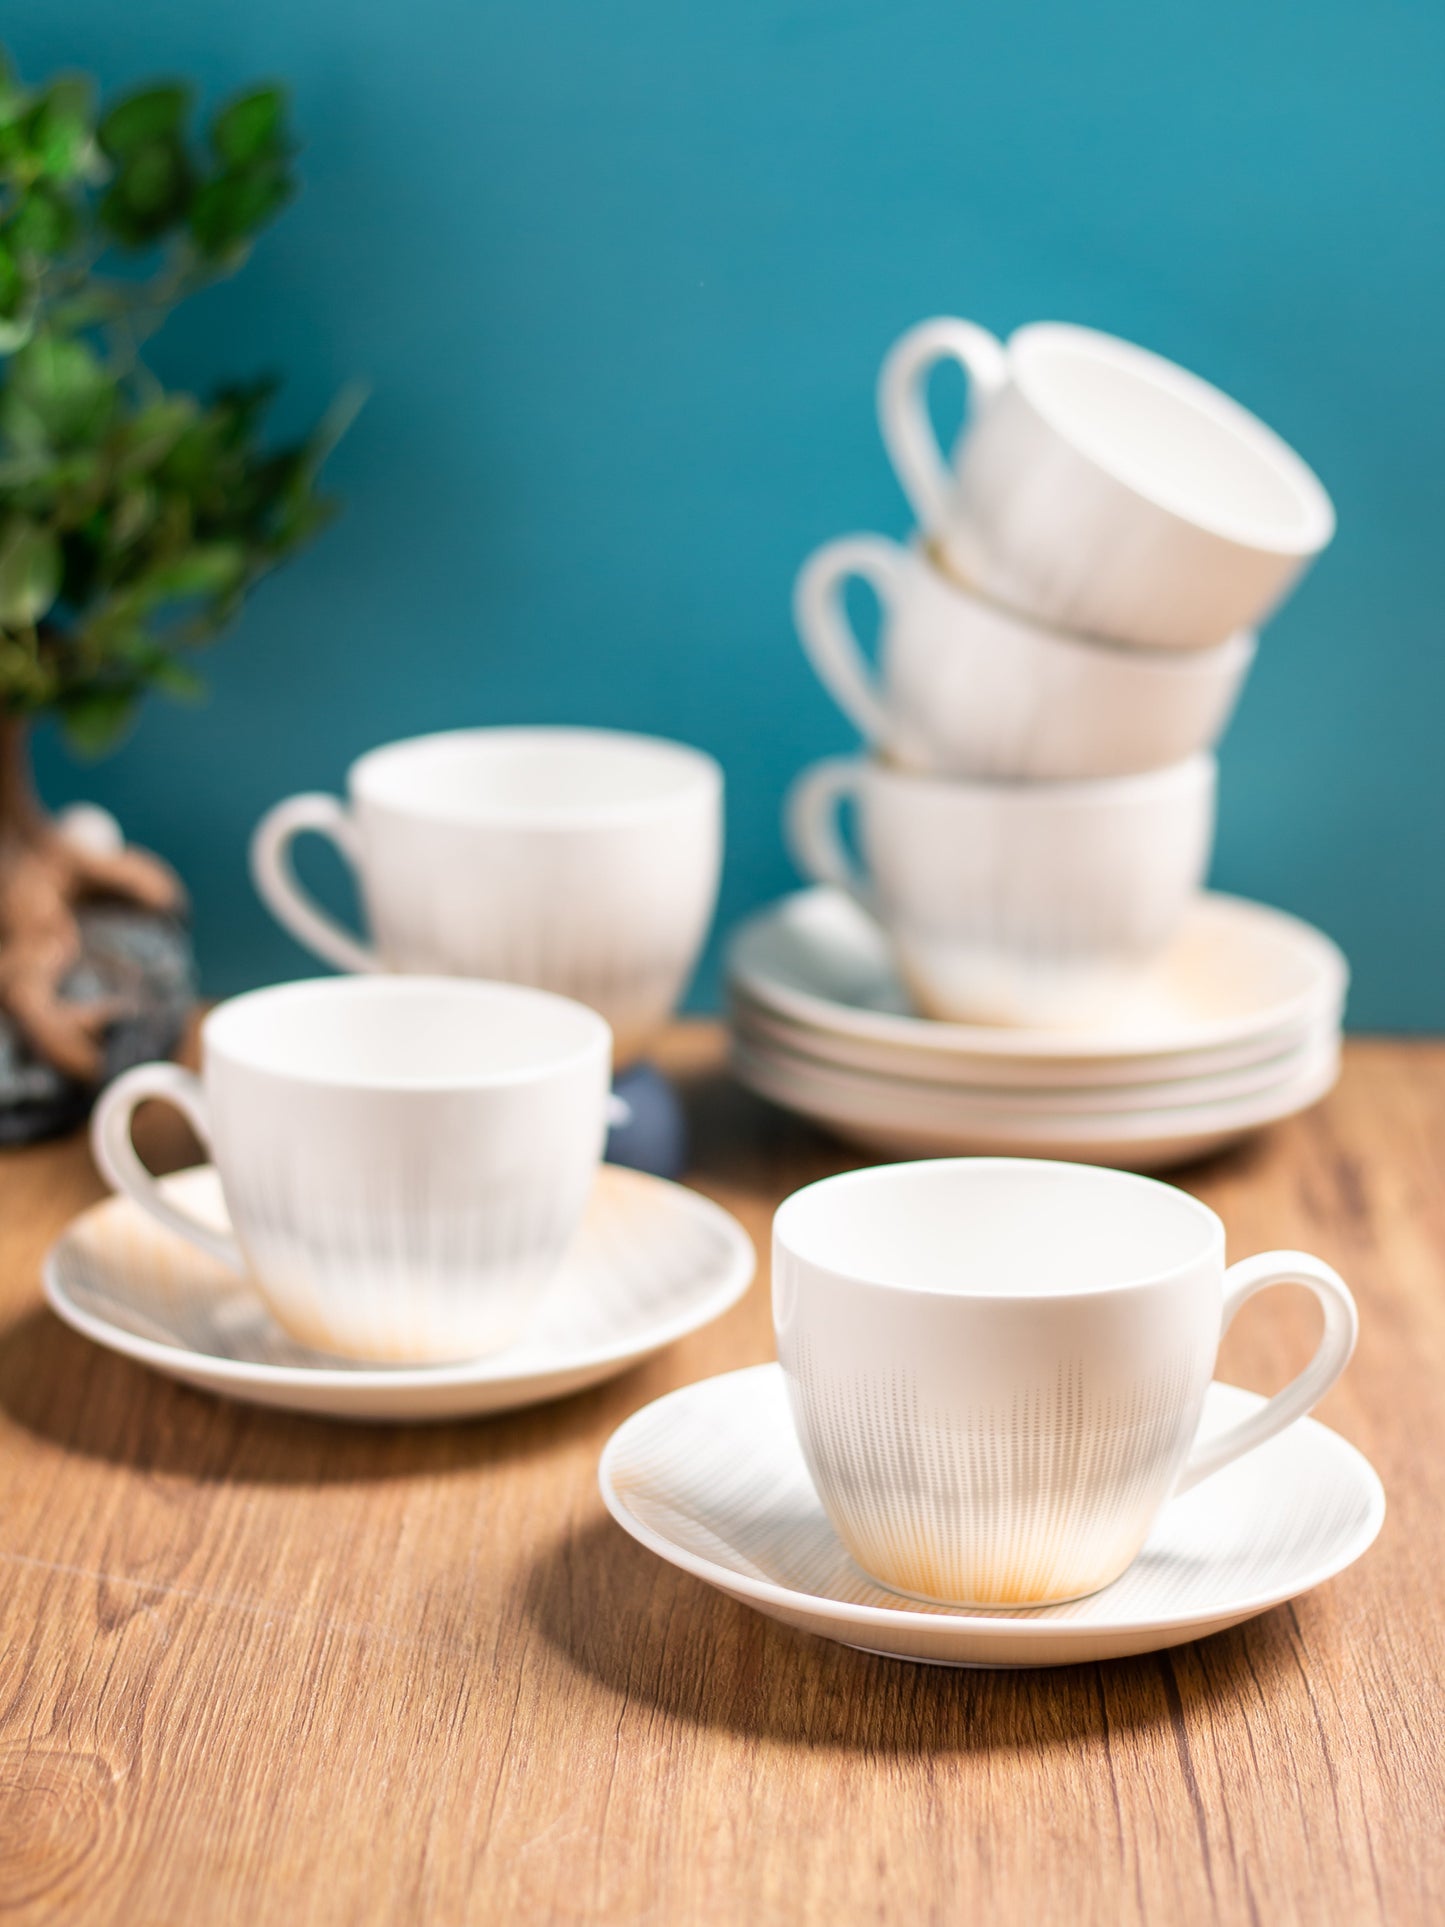 Cream Super Cup & Saucer, 170 ml, Set of 12 (6 Cups + 6 Saucers) (S306)